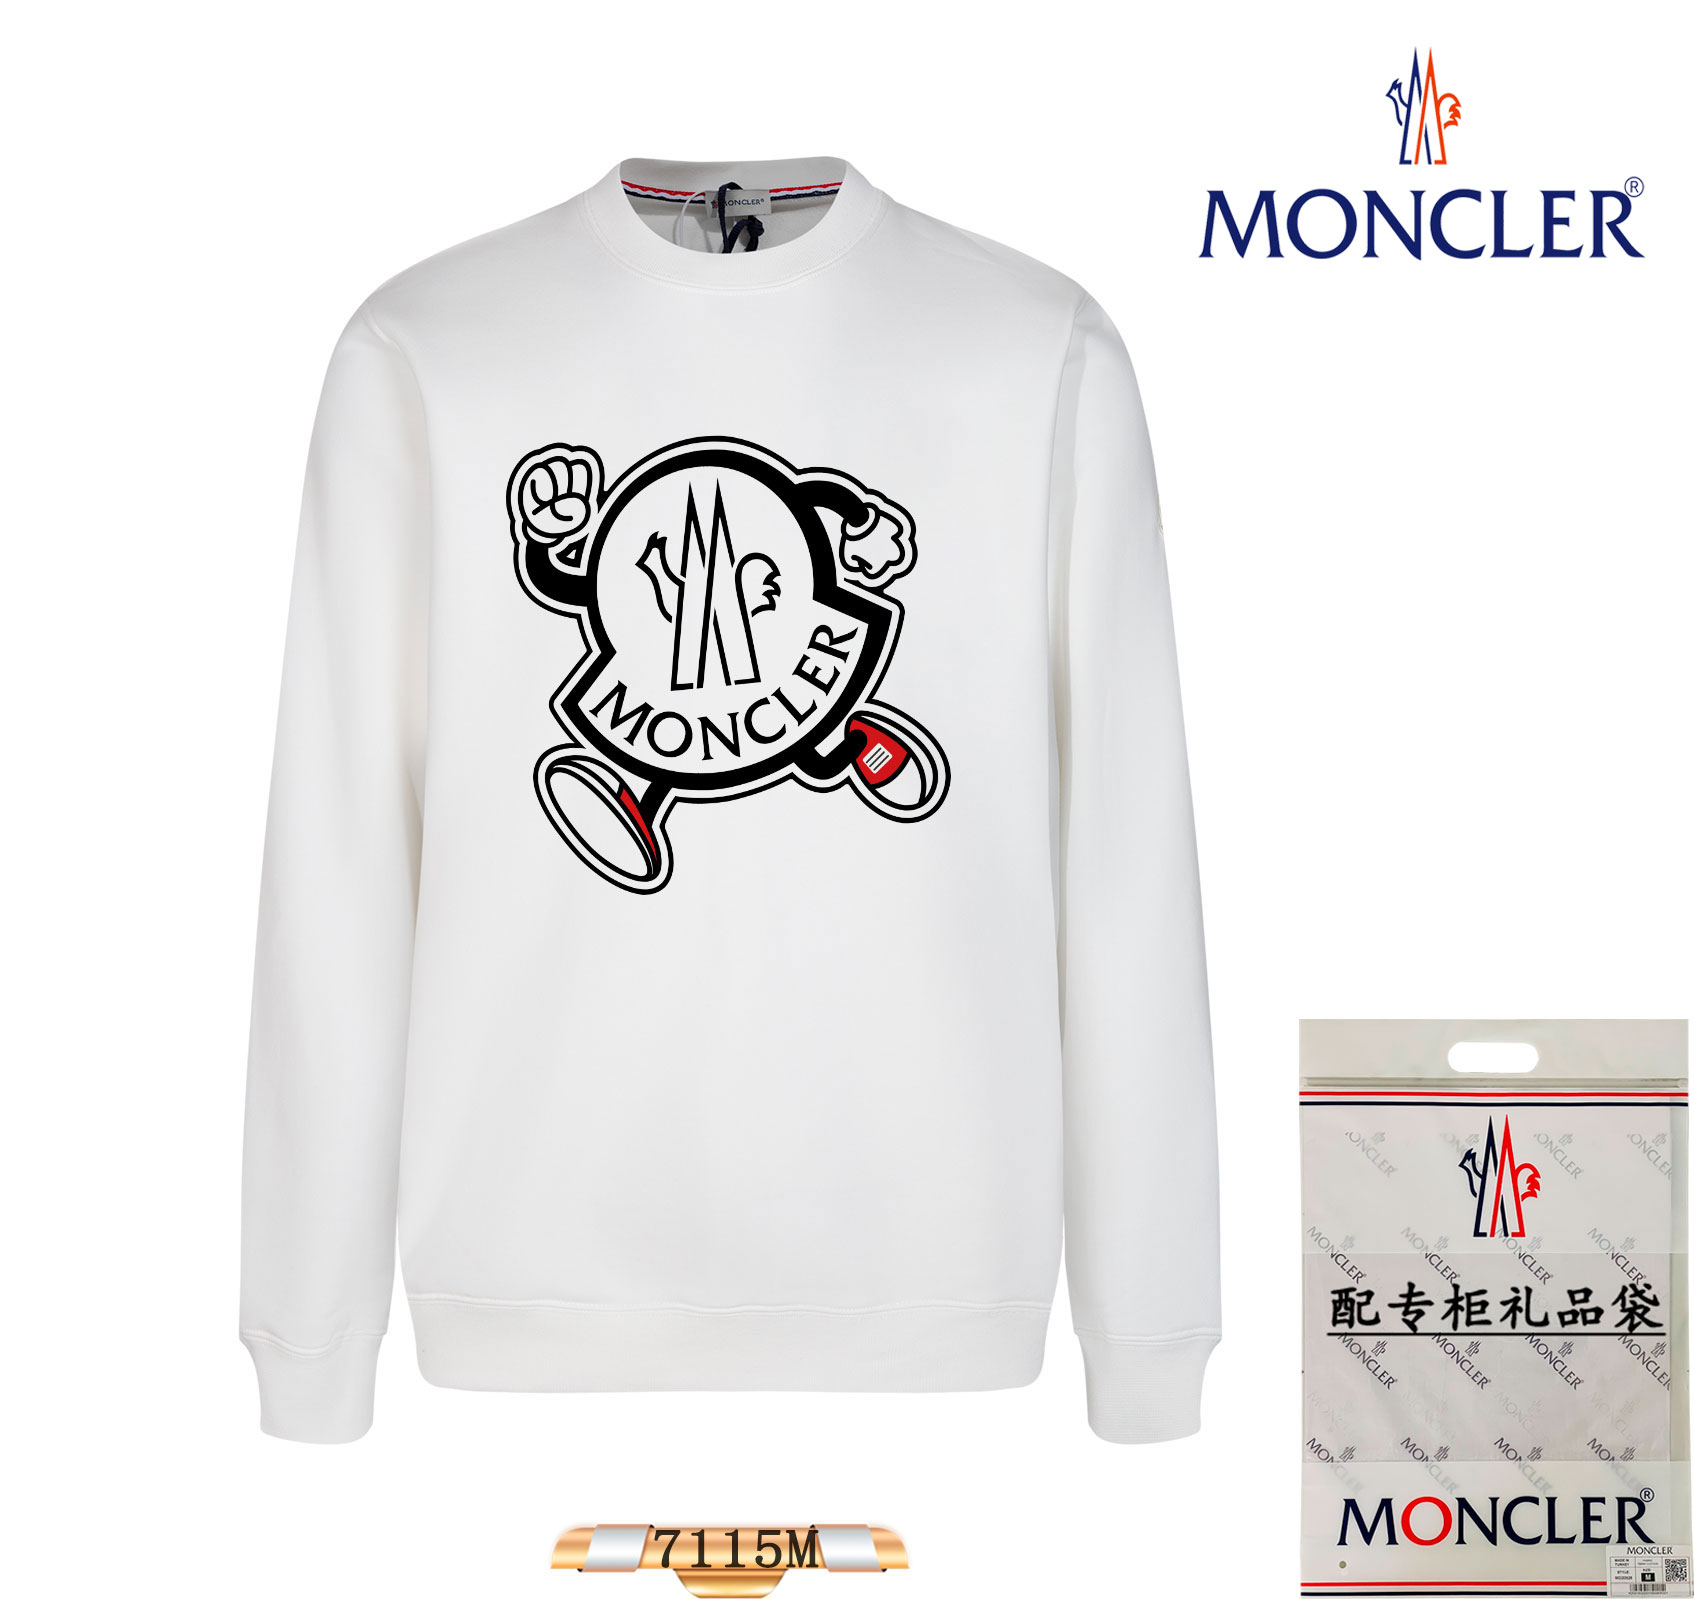 Moncler Clothing Sweatshirts Apricot Color Black Silver White Unisex Cotton Spring Collection